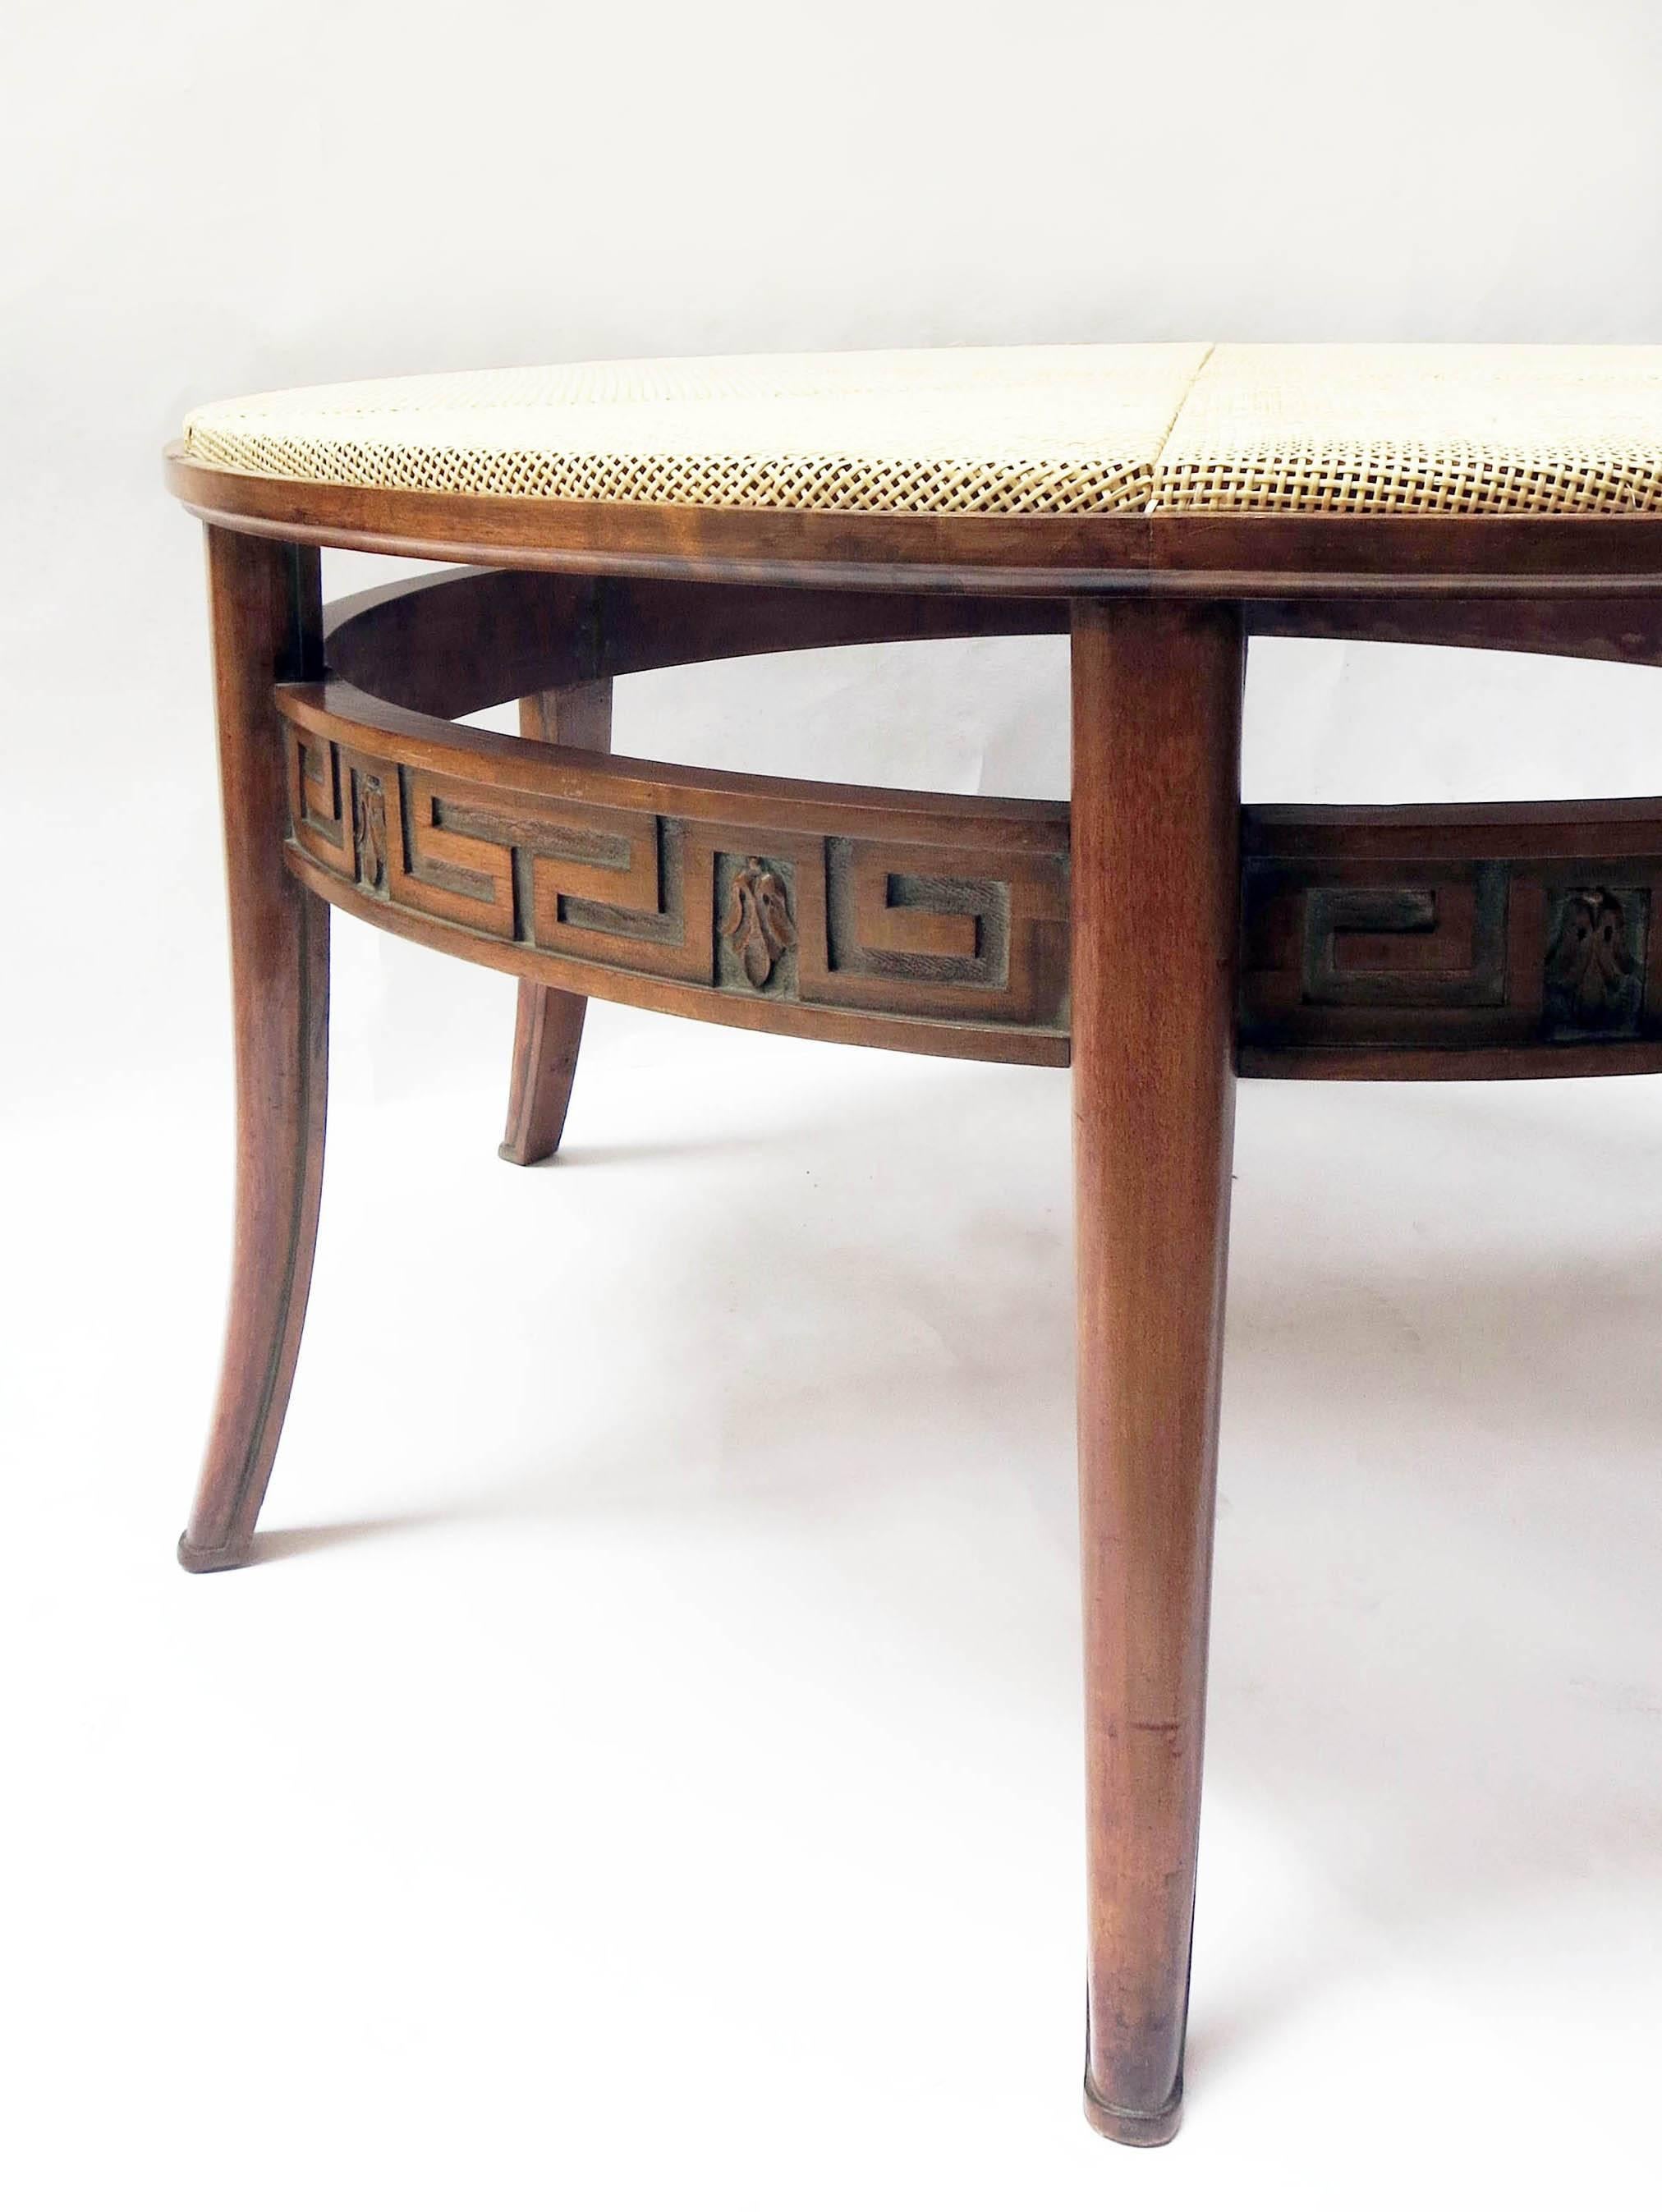 Amazing round coffee table from Sweden, circa 1940.
In patinated solid elm with a beautiful carved belt.
The top is made in sunburst cane panels.